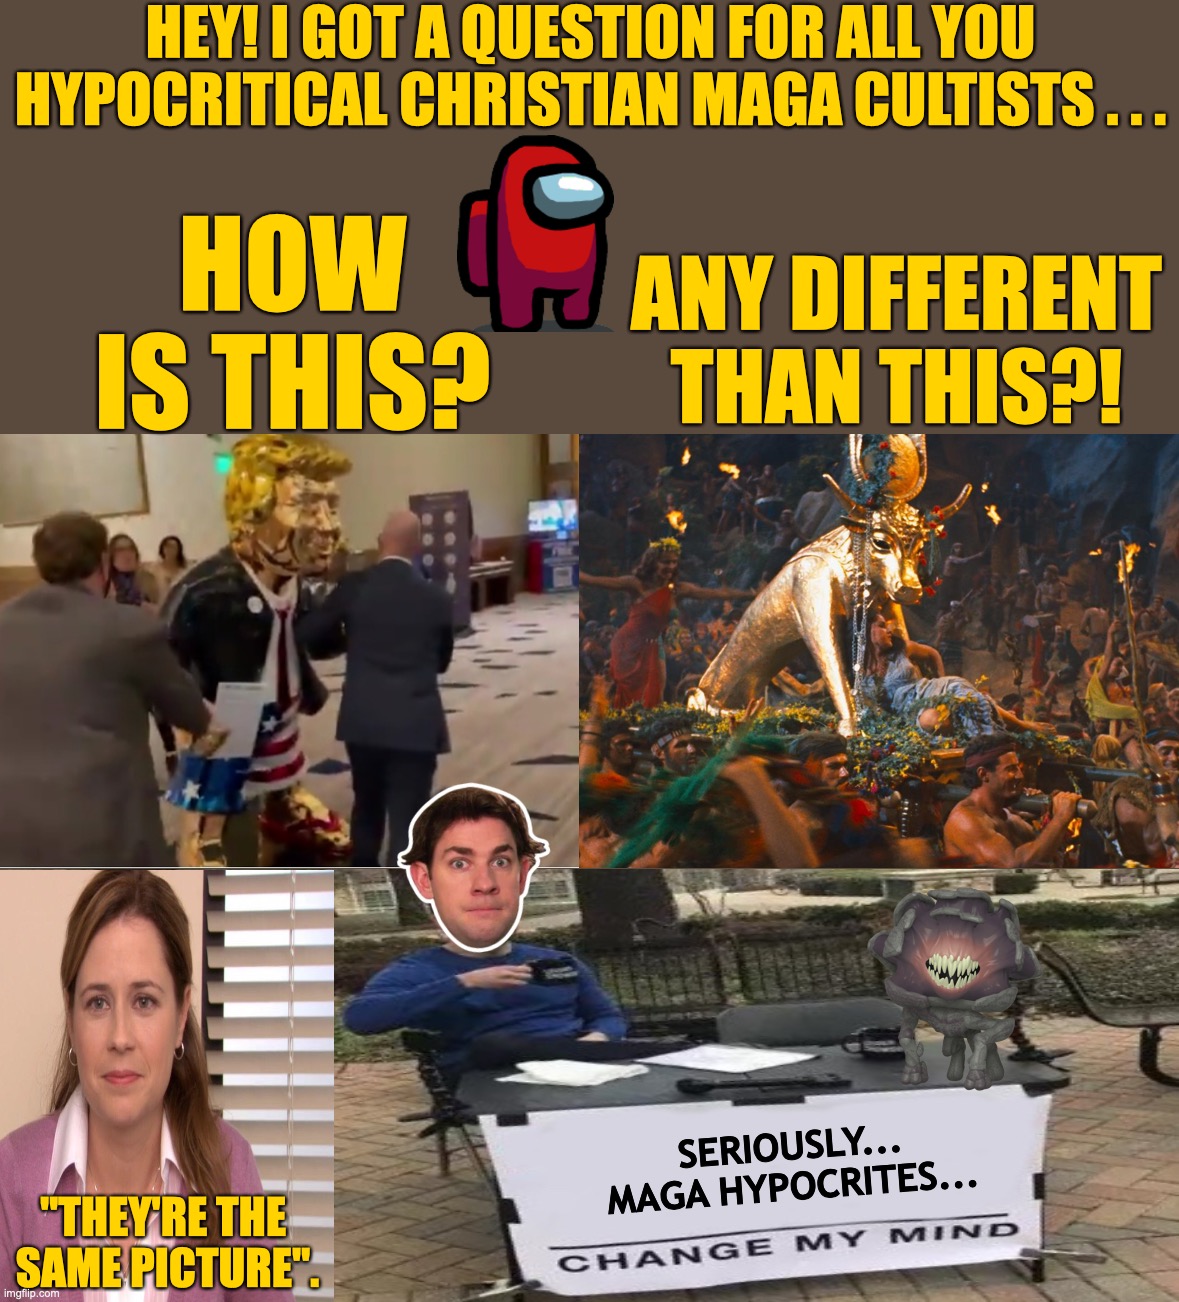 Trump Gold Statue VS. Golden Calf | HEY! I GOT A QUESTION FOR ALL YOU HYPOCRITICAL CHRISTIAN MAGA CULTISTS . . . HOW
IS THIS? ANY DIFFERENT
THAN THIS?! SERIOUSLY...
MAGA HYPOCRITES... "THEY'RE THE 
SAME PICTURE". | image tagged in trump gold statue,a quiet place john krasinski,golden calf ten commandments,jim halpert,pam beesly | made w/ Imgflip meme maker